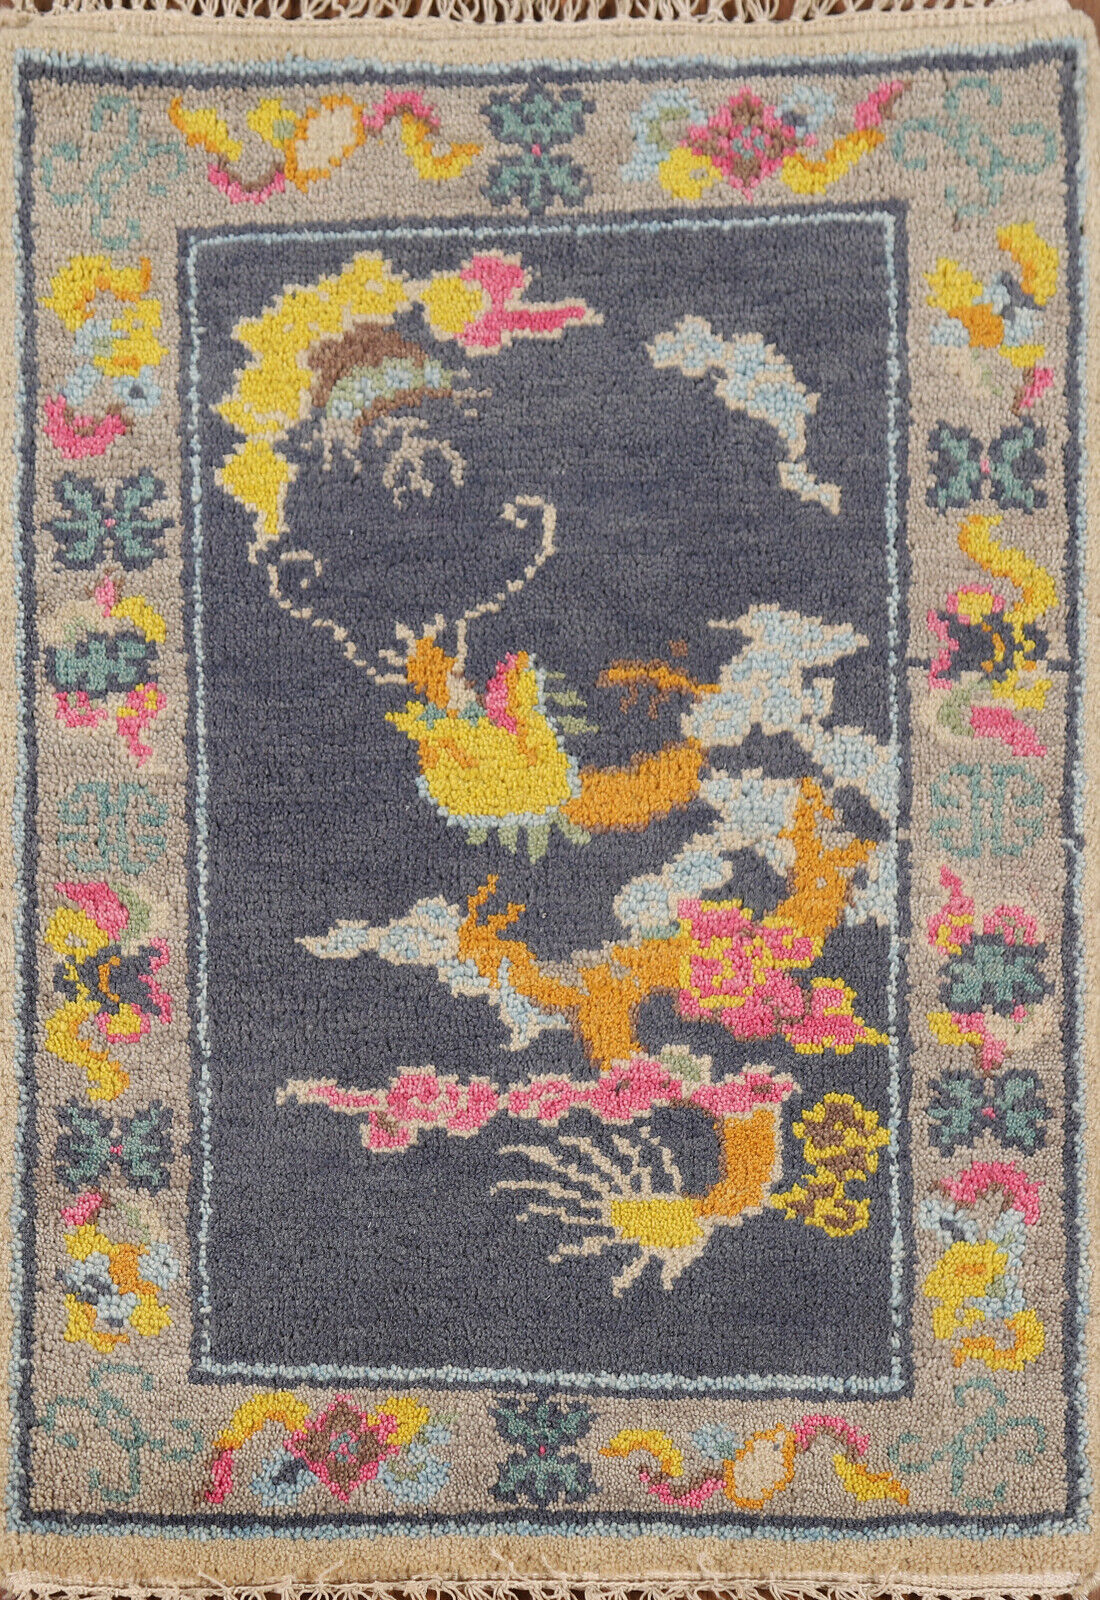 Exquisite Art Deco Floral Wool Rug Hand-Knotted 2x3 ft